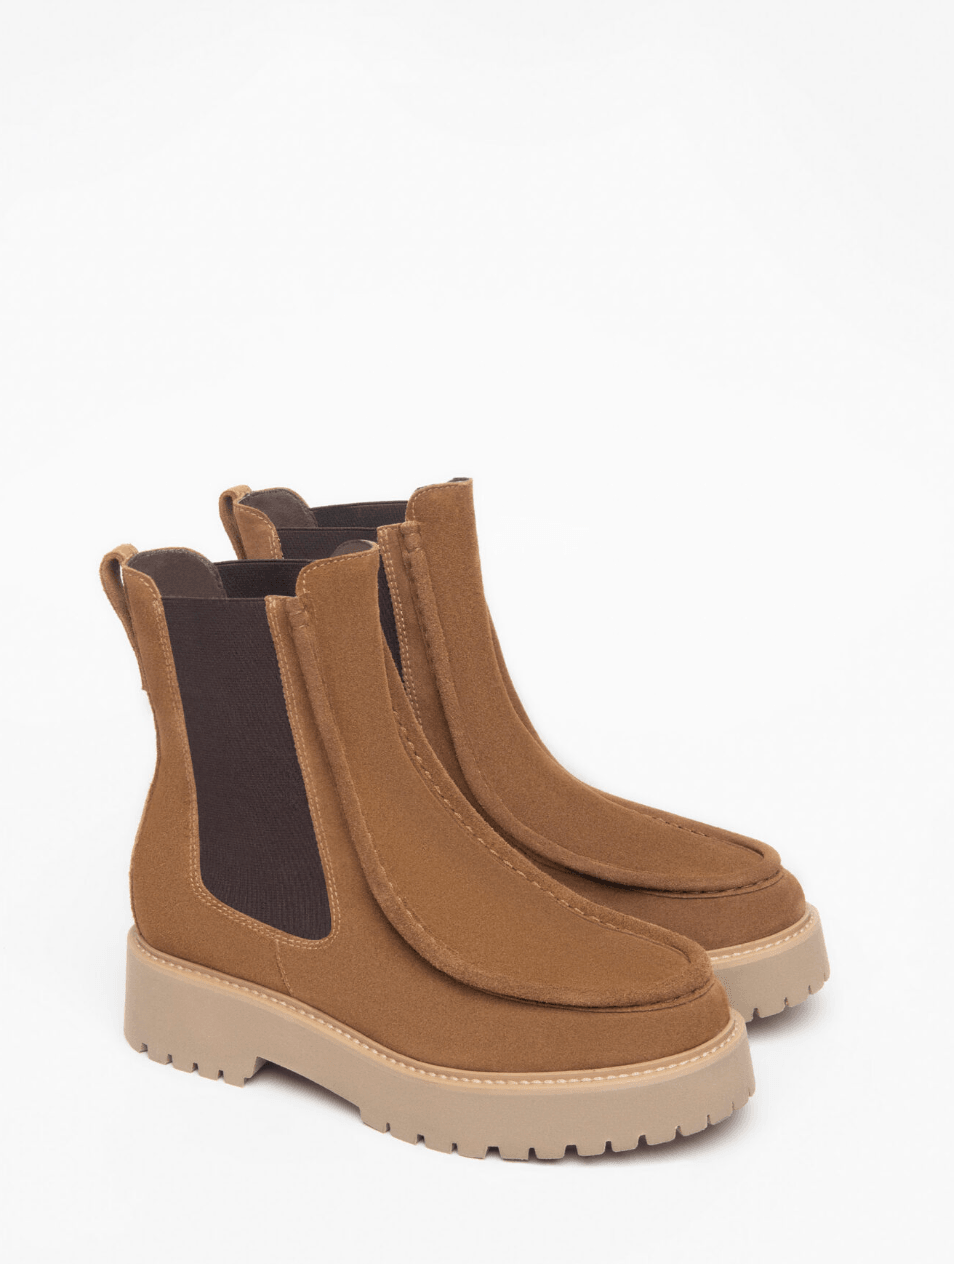 Camel Suede Leather Boot - Diamonds & Pearls